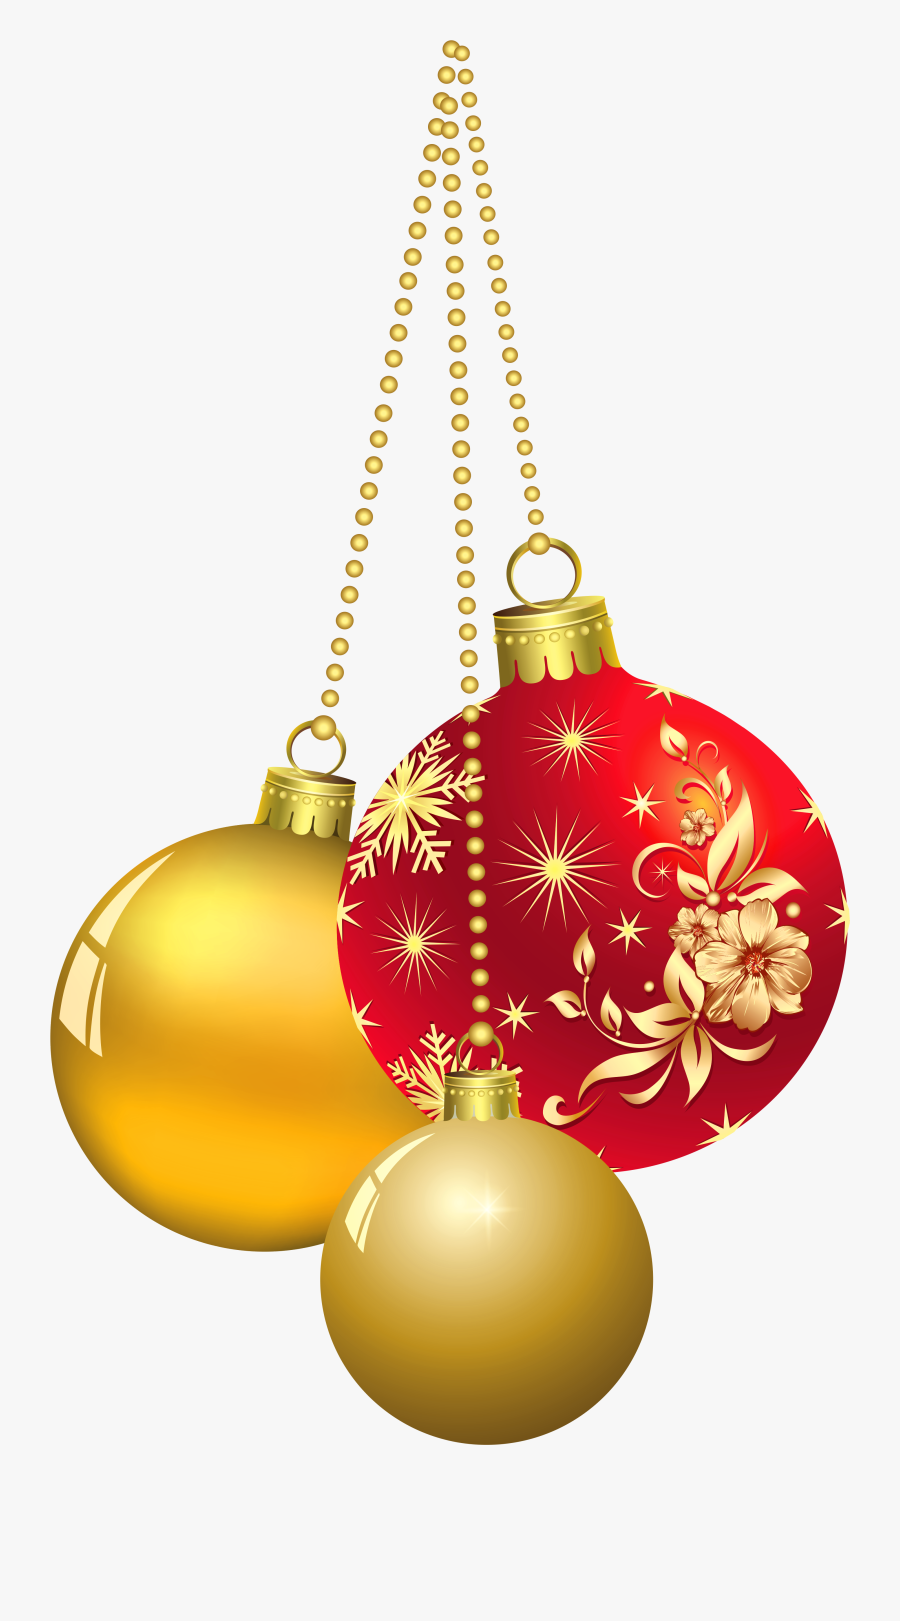 Transparent Christmas Png Gallery - Christmas Baubles Transparent Background, Transparent Clipart